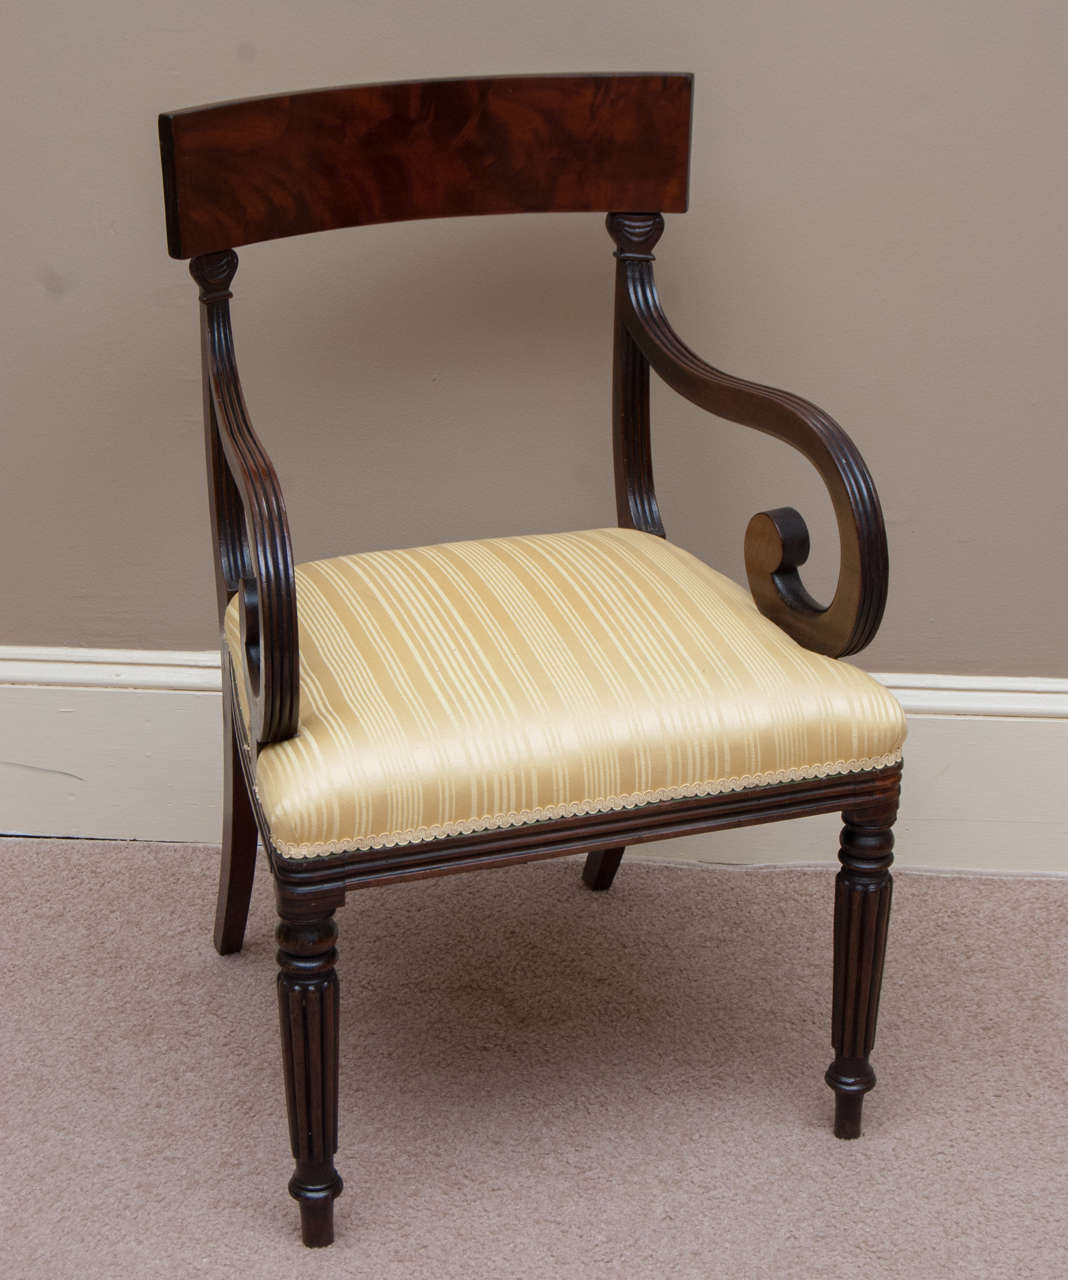 This high style arm chair has a flame mahogany back rail -- very fine hand carving, turning and reeding -- the scroll arms are excellently proportioned -- upholstery is in good shape -- chair is strong and comfortable.